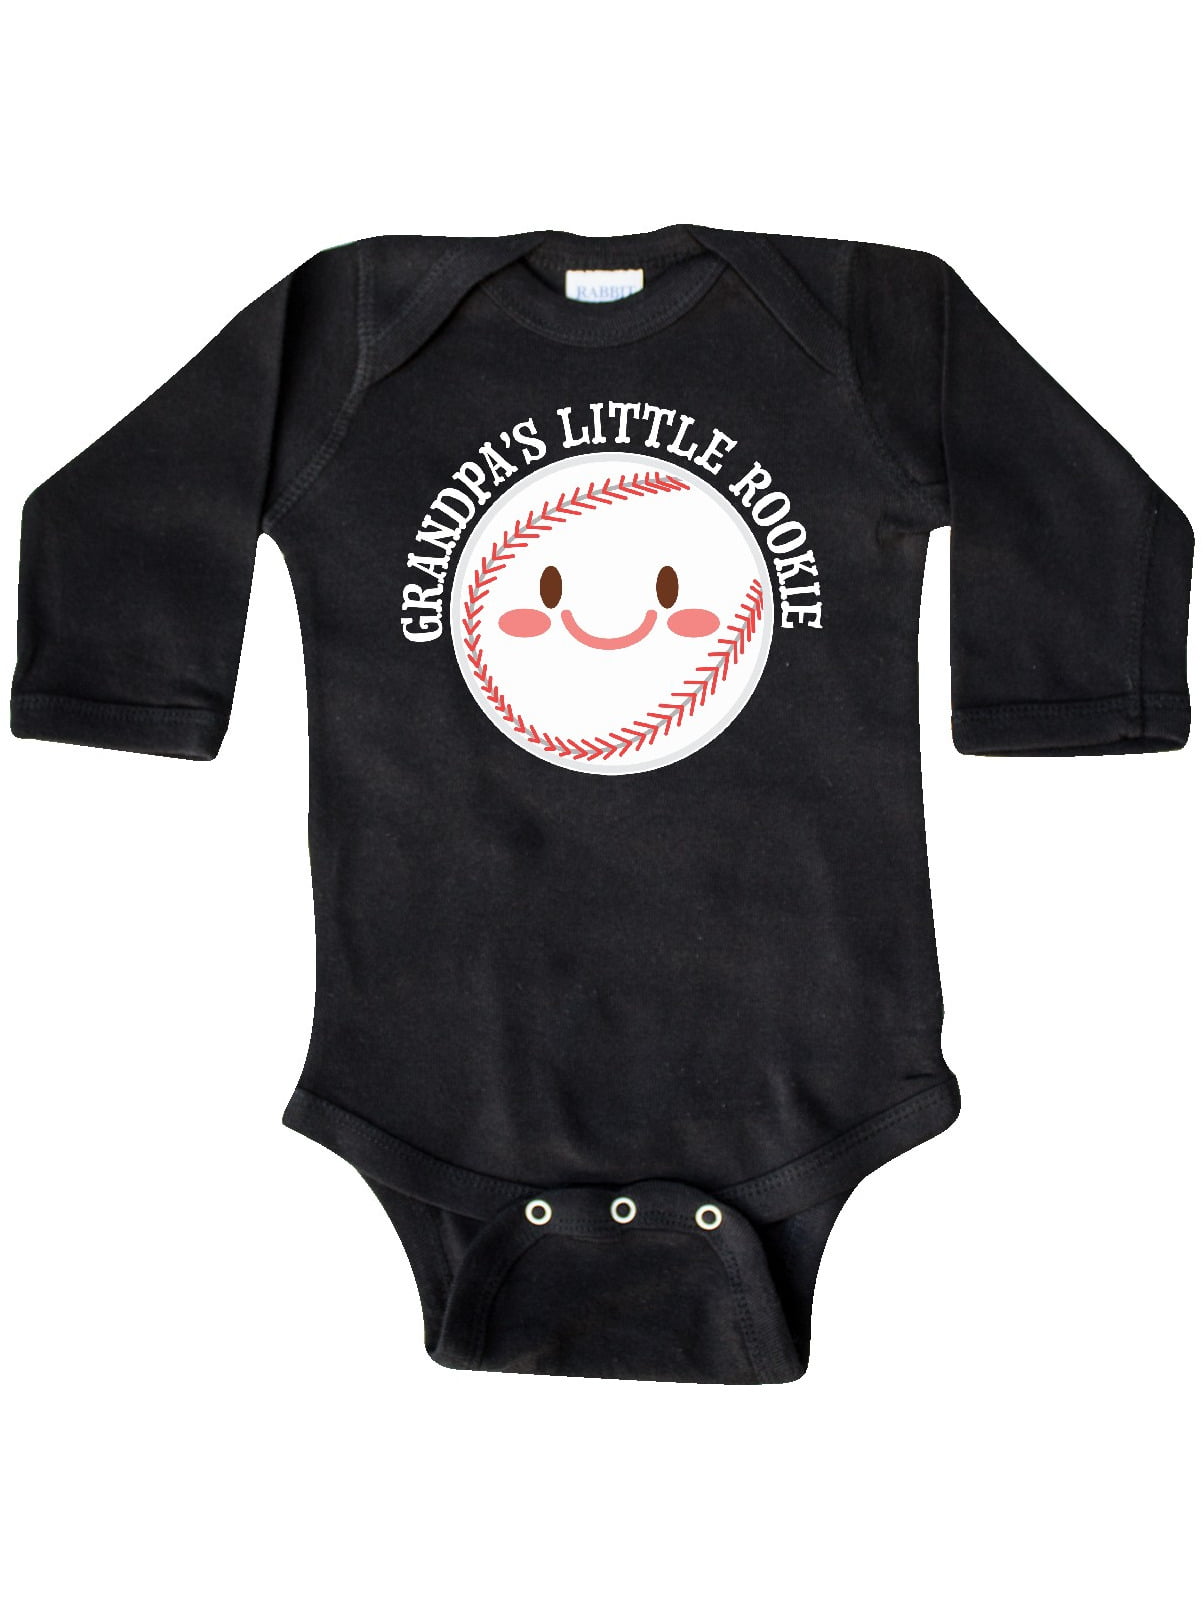 Cleveland Baseball Fans NB-7T Rookie of The Year Navy Onesie or Toddler Tee 